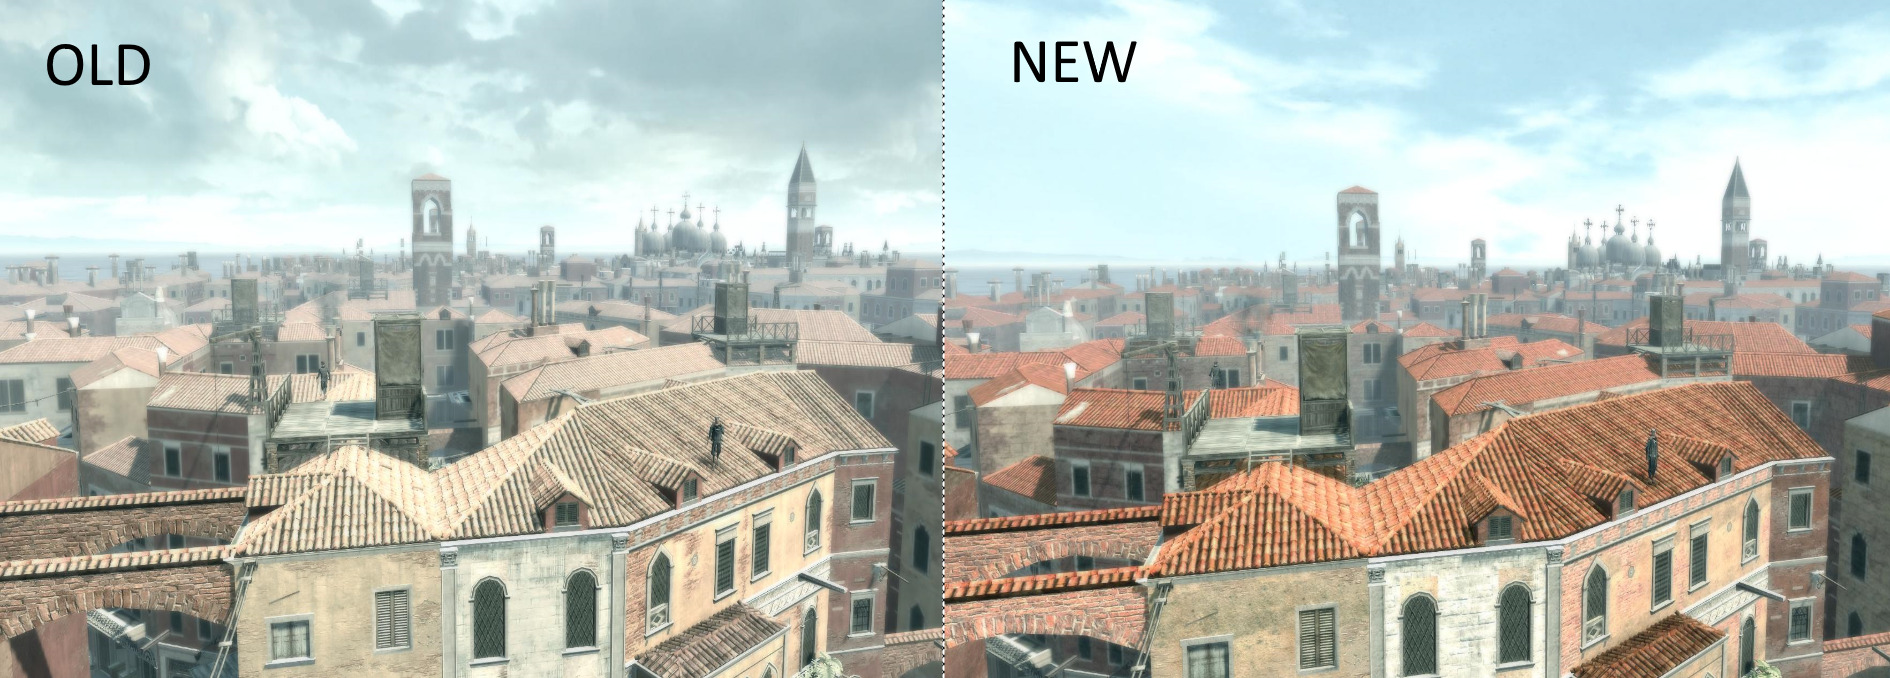 Assassin's Creed 2 - Overhaul 2.0 mod is now available, comparison shots  included